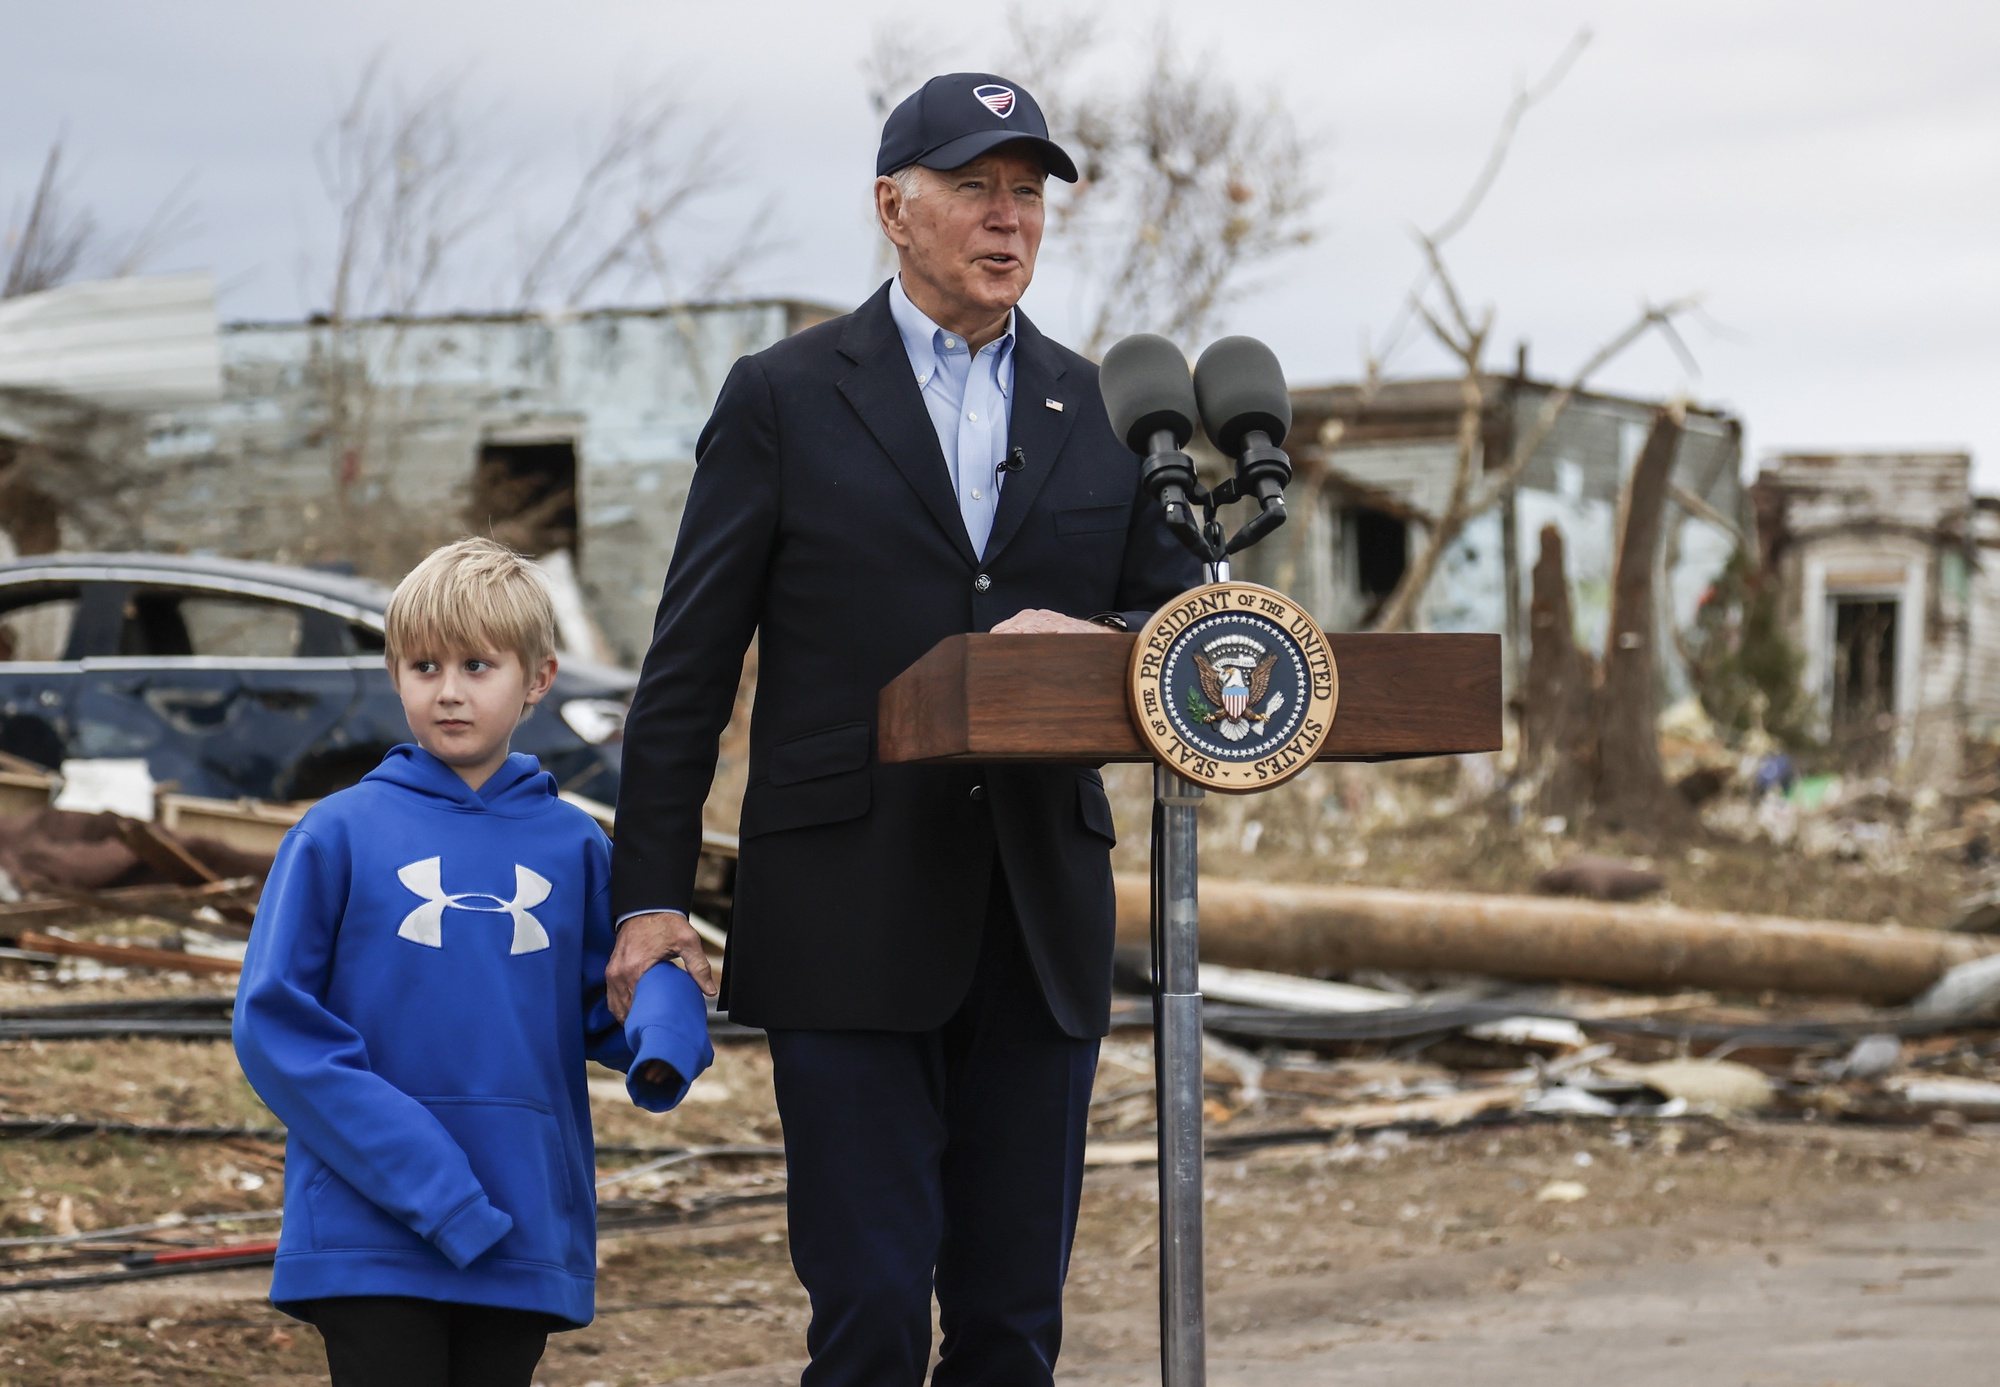 epa09644250 US President Joe Biden stands with seven year old Dane Maddox as he visits damage from a tornado that struck on 10 December 2021 that destroyed homes and businesses in Dawson Springs, Kentucky, USA, 15 December 2021. According to the latest tally 74 people people lost their lives in Kentucky and the search for more than 100 still missing continues.  EPA/TANNEN MAURY